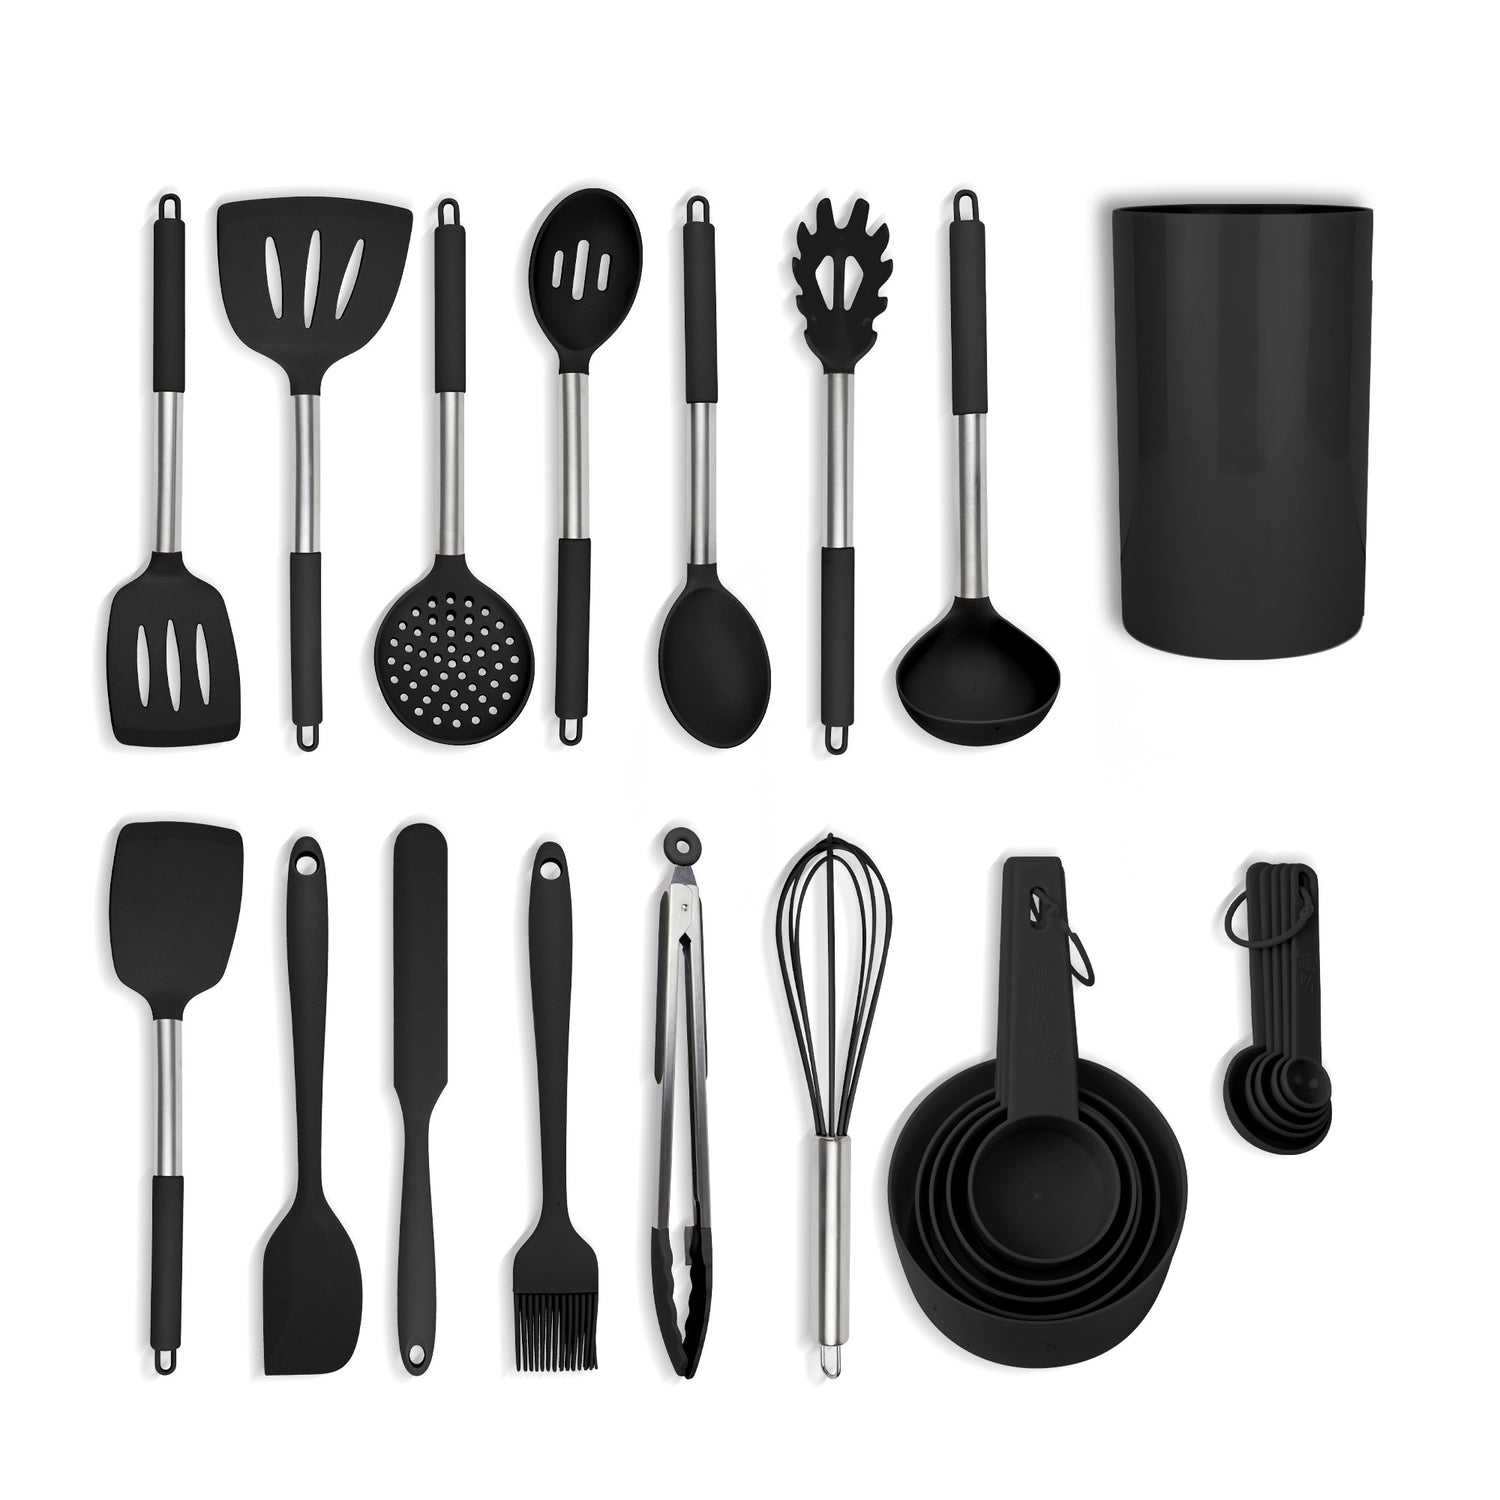 Classic Cuisine Stainless Steel and Silicone Kitchen Utensil (Set